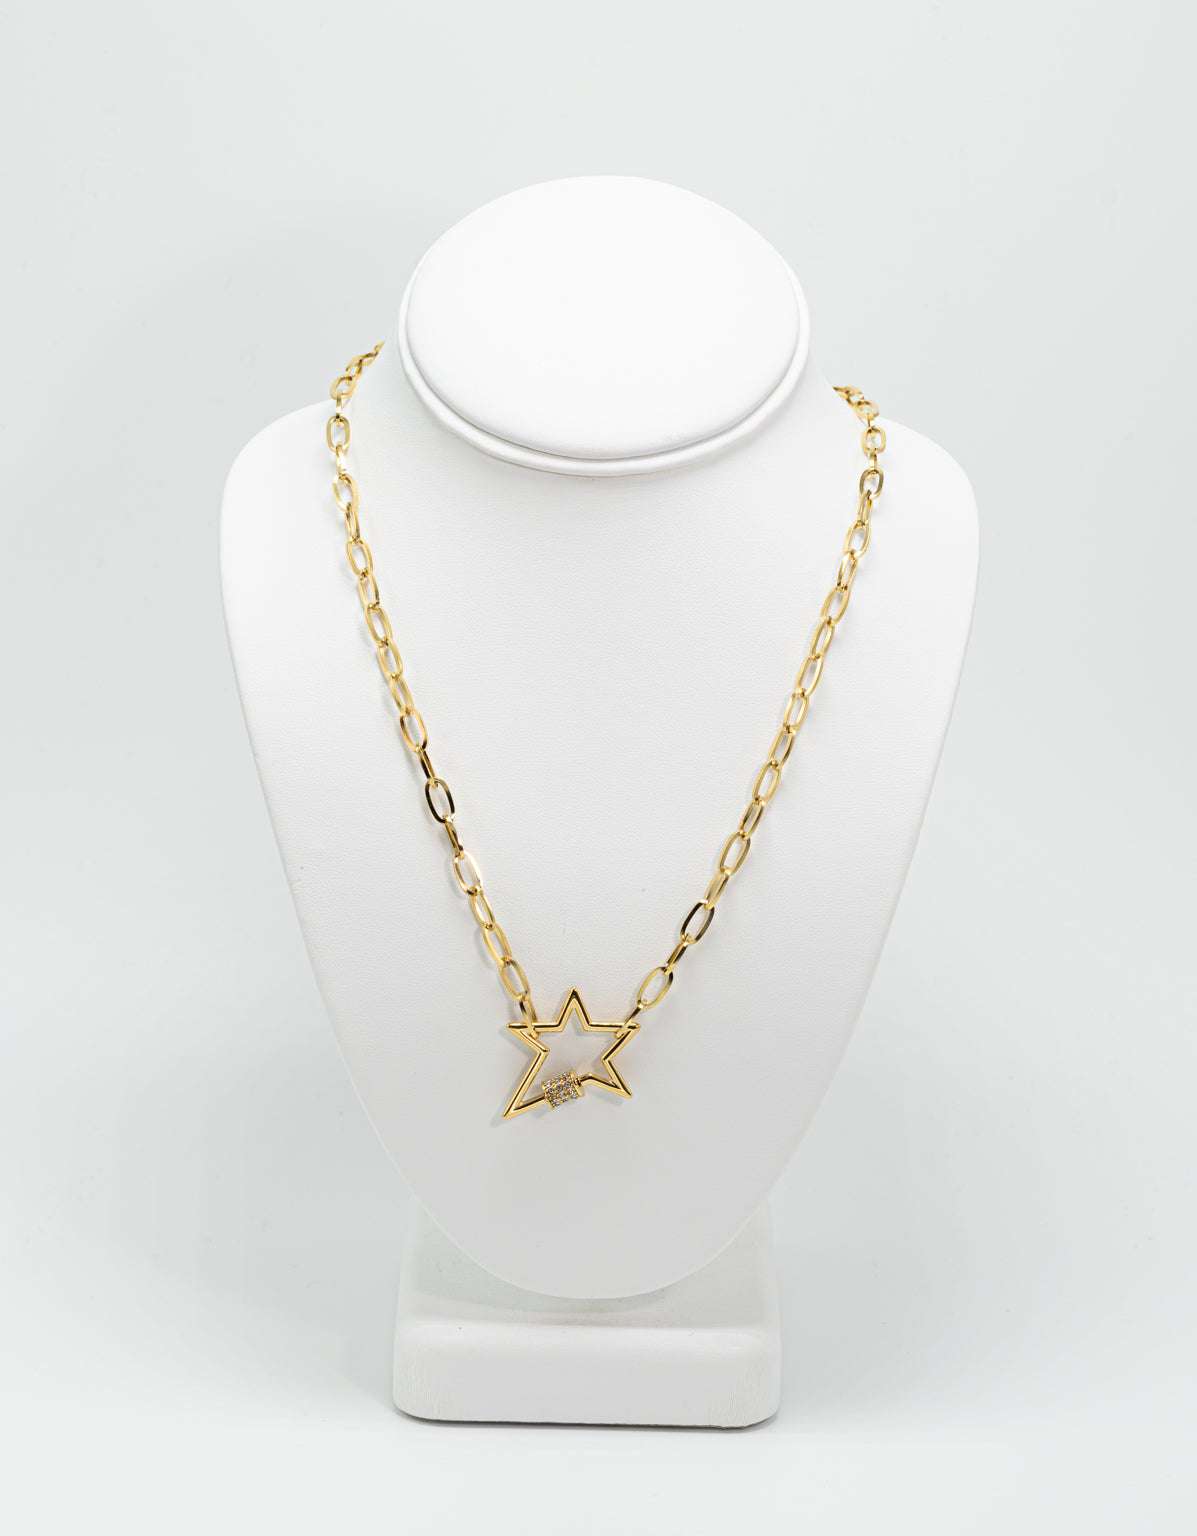 Stainless Steel Star Pendant Necklace, High Quality Zirconia Jewelry